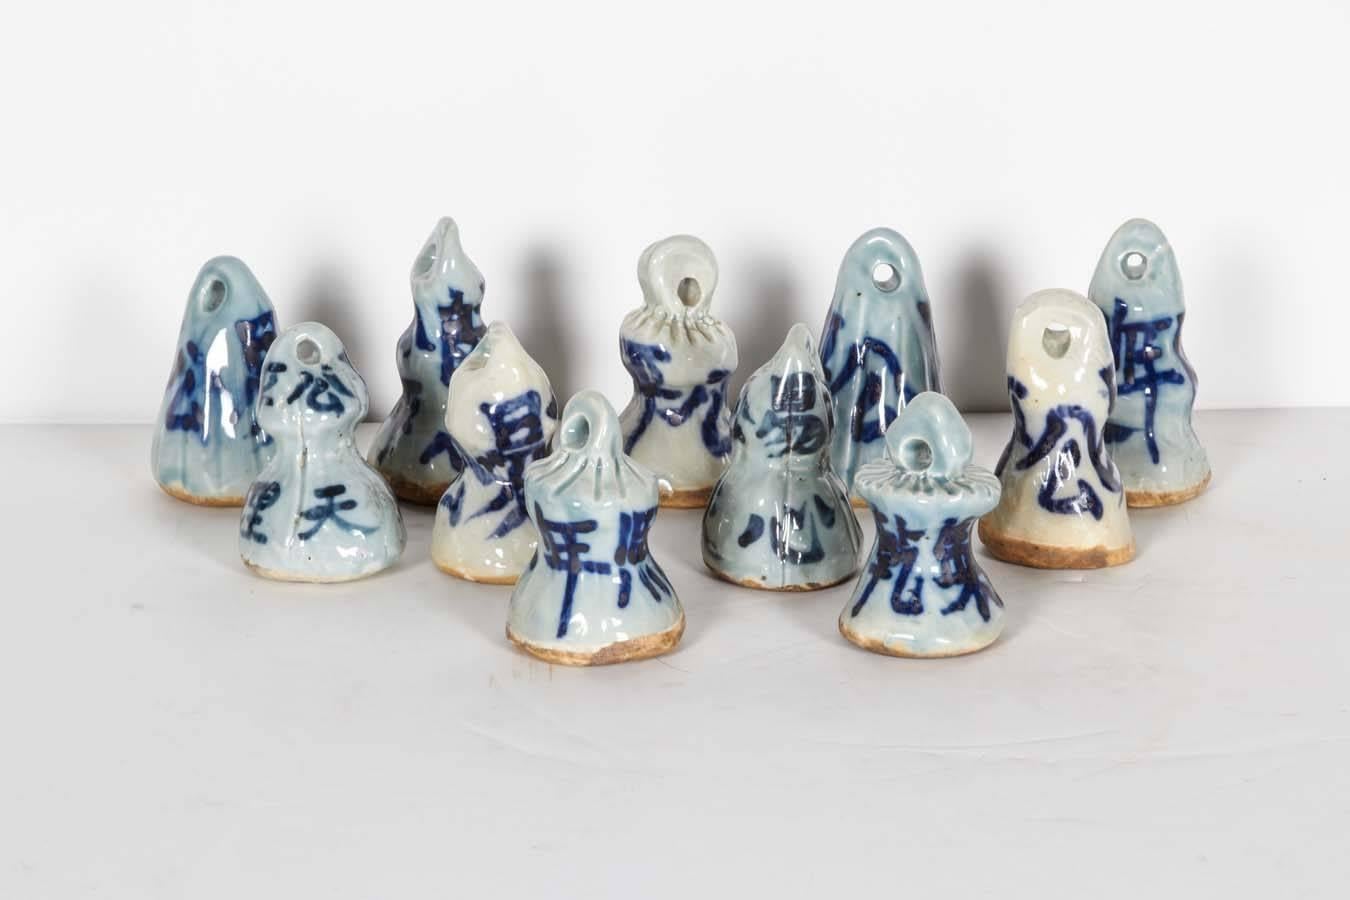 Chinese porcelain weight measures, circa 1920, from Shanxi Province. Each with distinctive shapes and Chinese characters. They work best as a collection. Several pieces available. Priced individually. Measurements vary, call shop for details.
CR737.